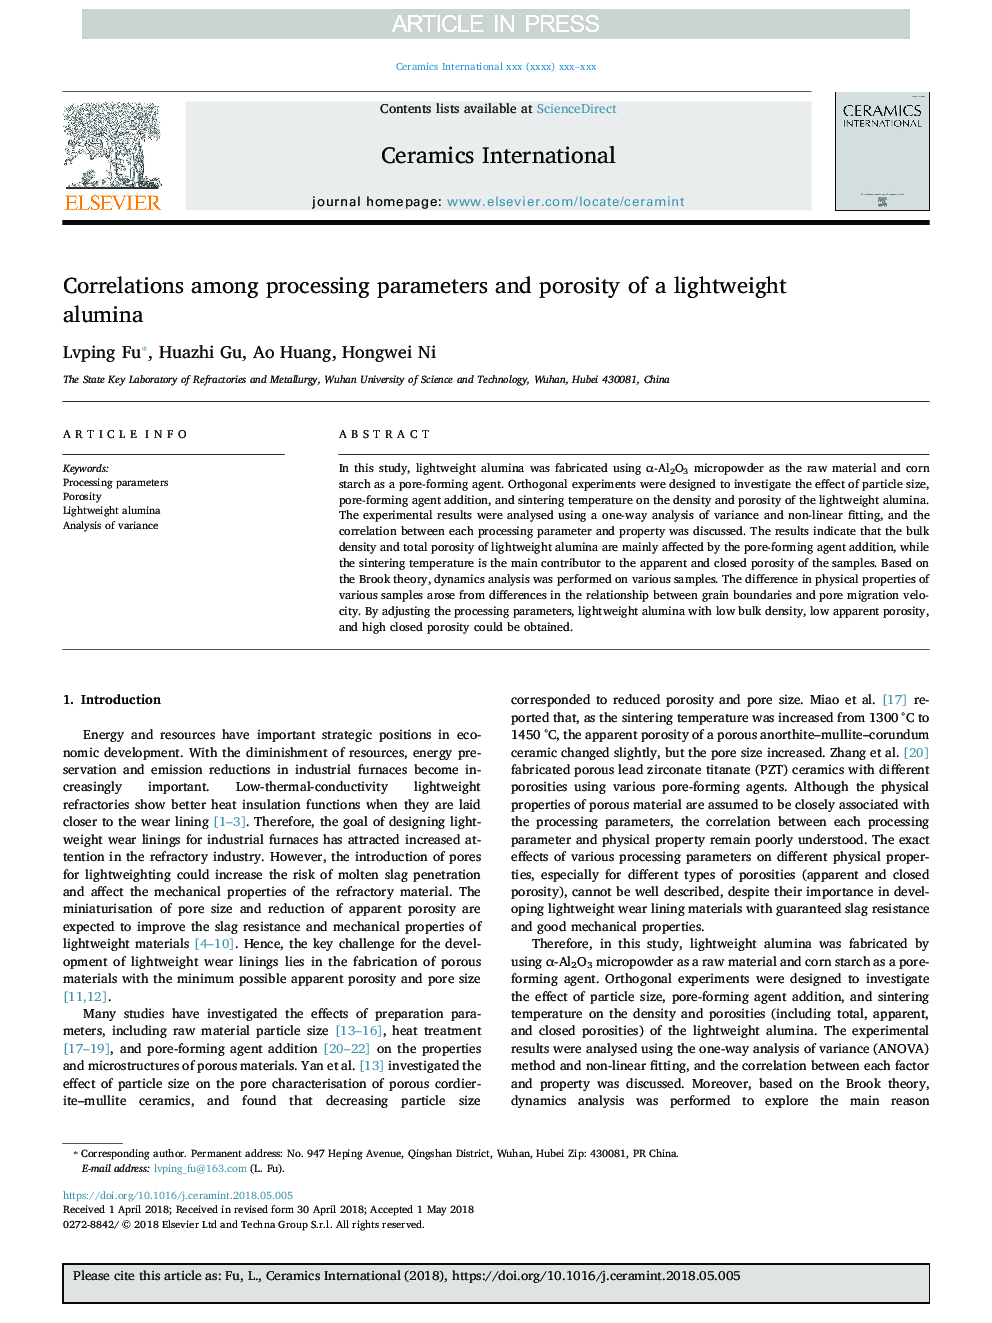 Correlations among processing parameters and porosity of a lightweight alumina